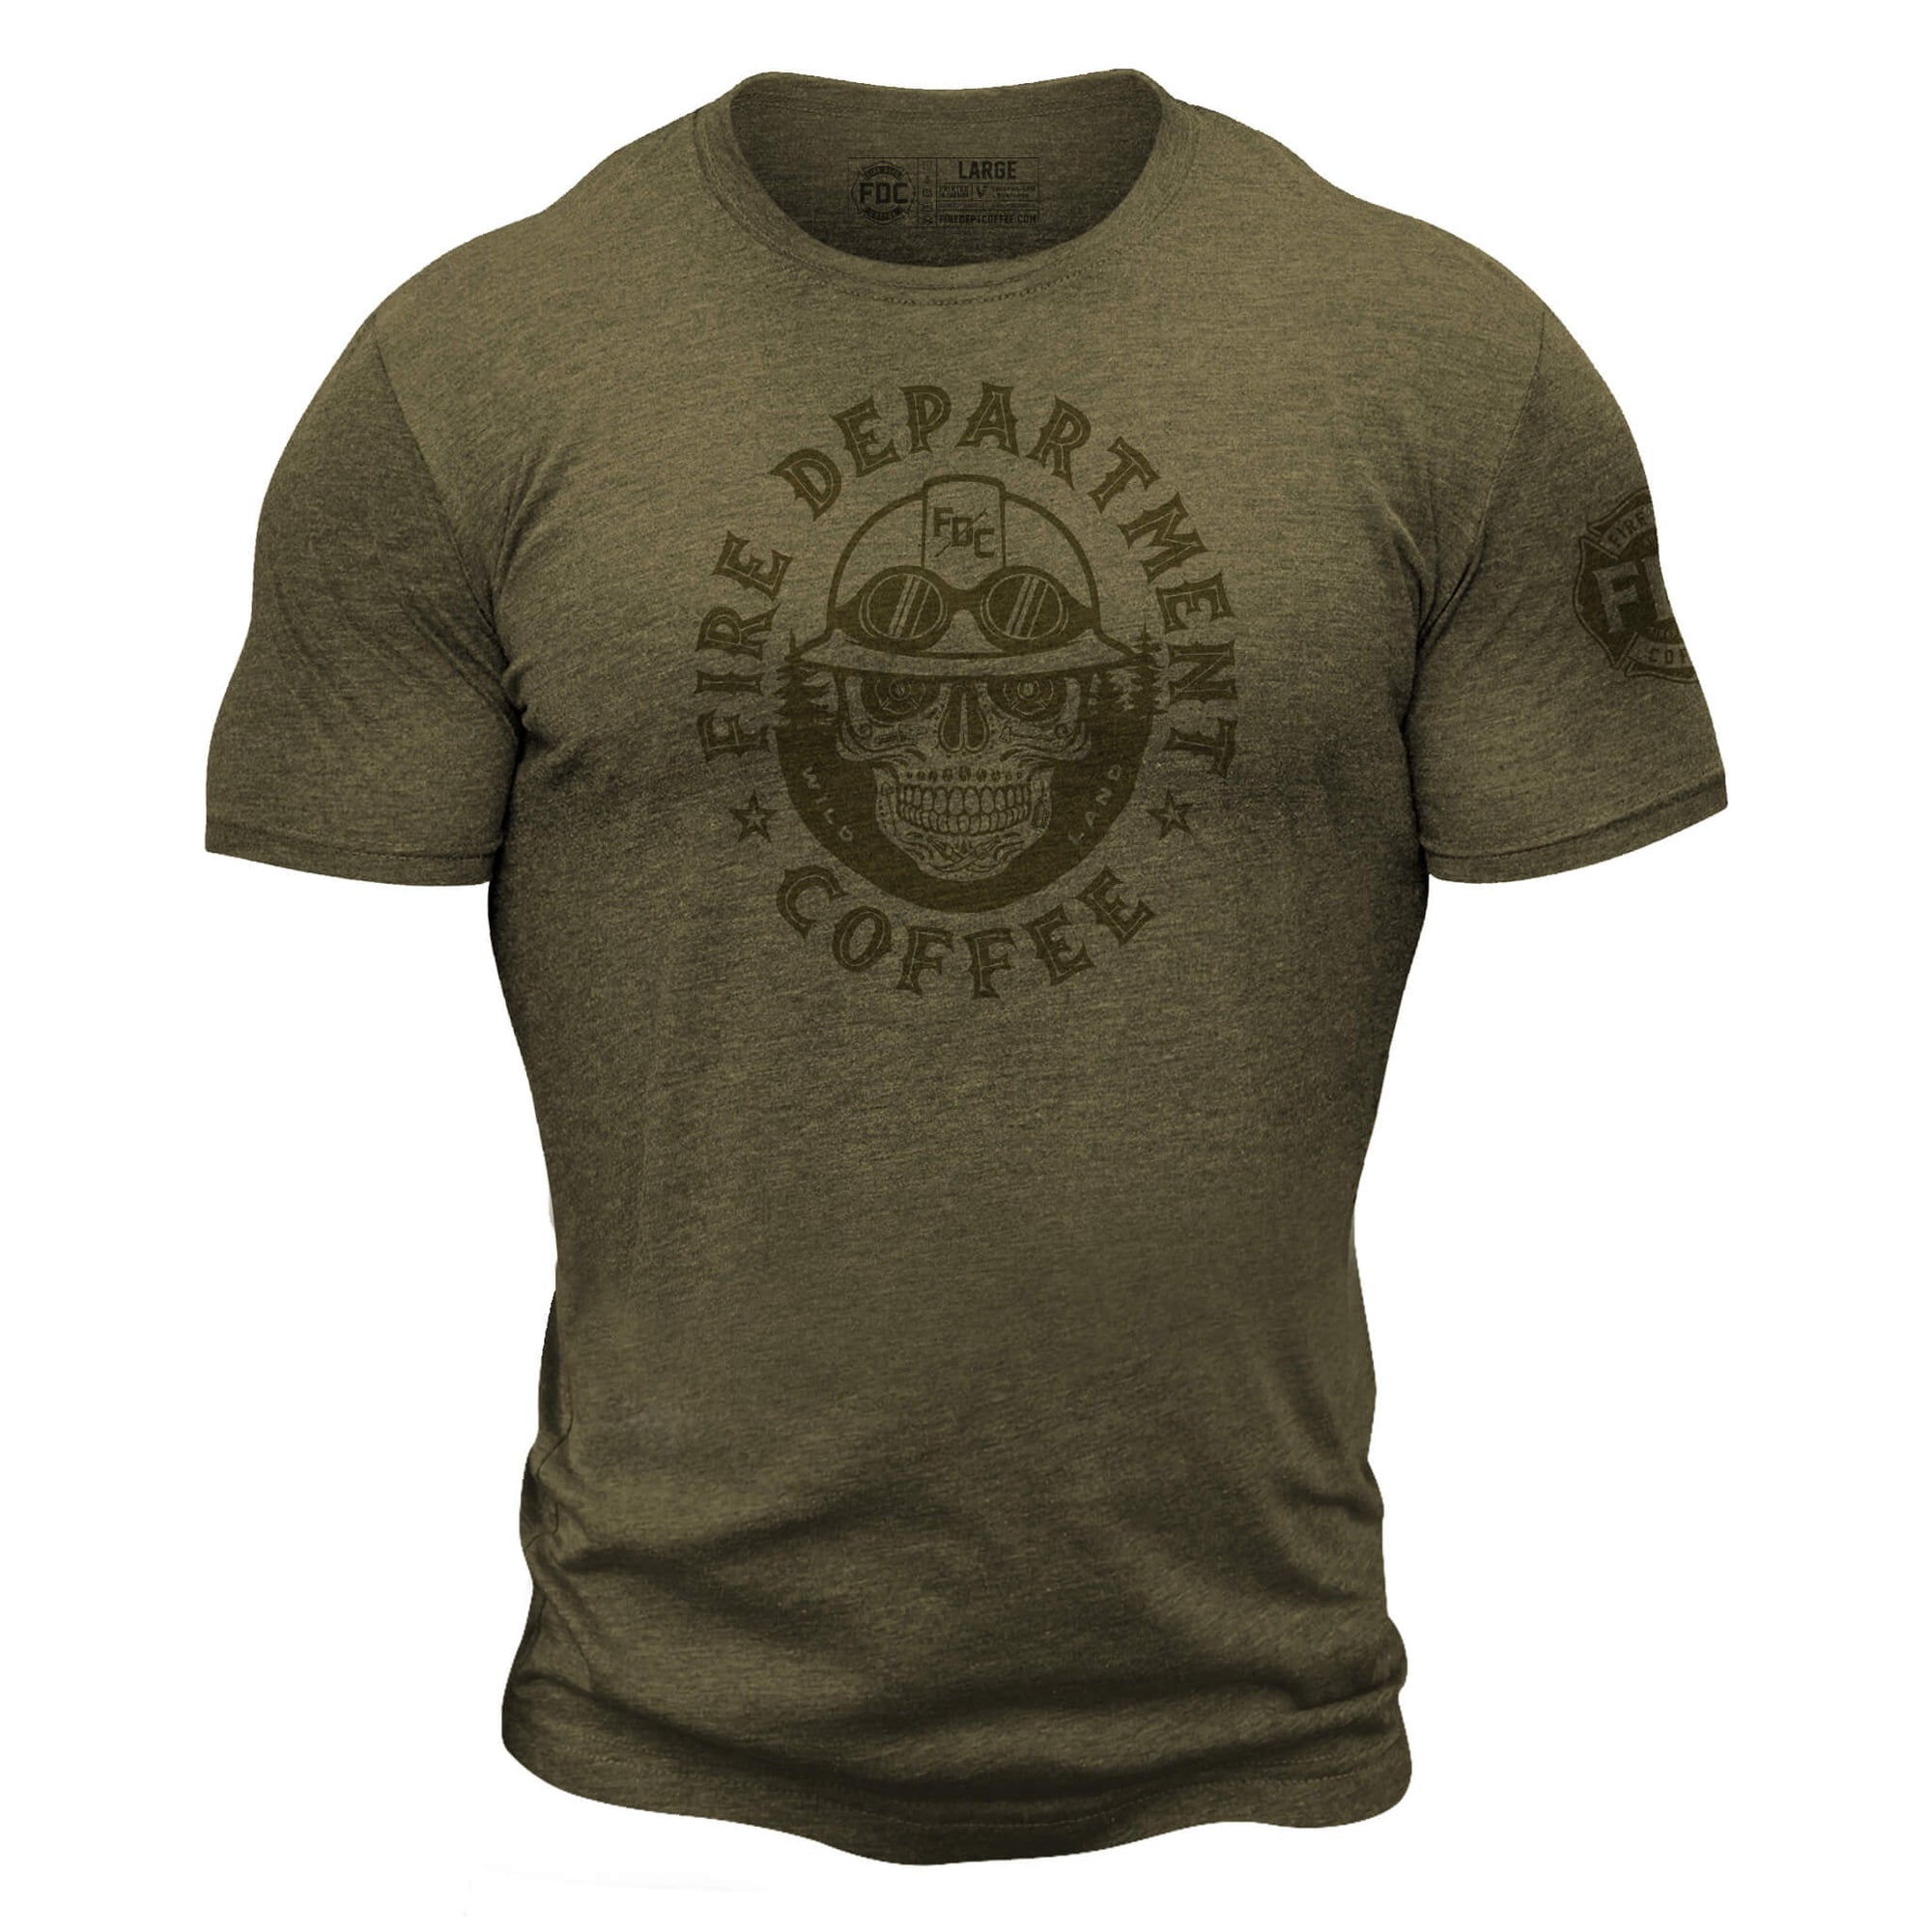 Green shirt with a skull wearing an FDC helmet. Around the skull is the text "Fire Department Coffee". There is an FDC maltese cross logo on the sleeve.